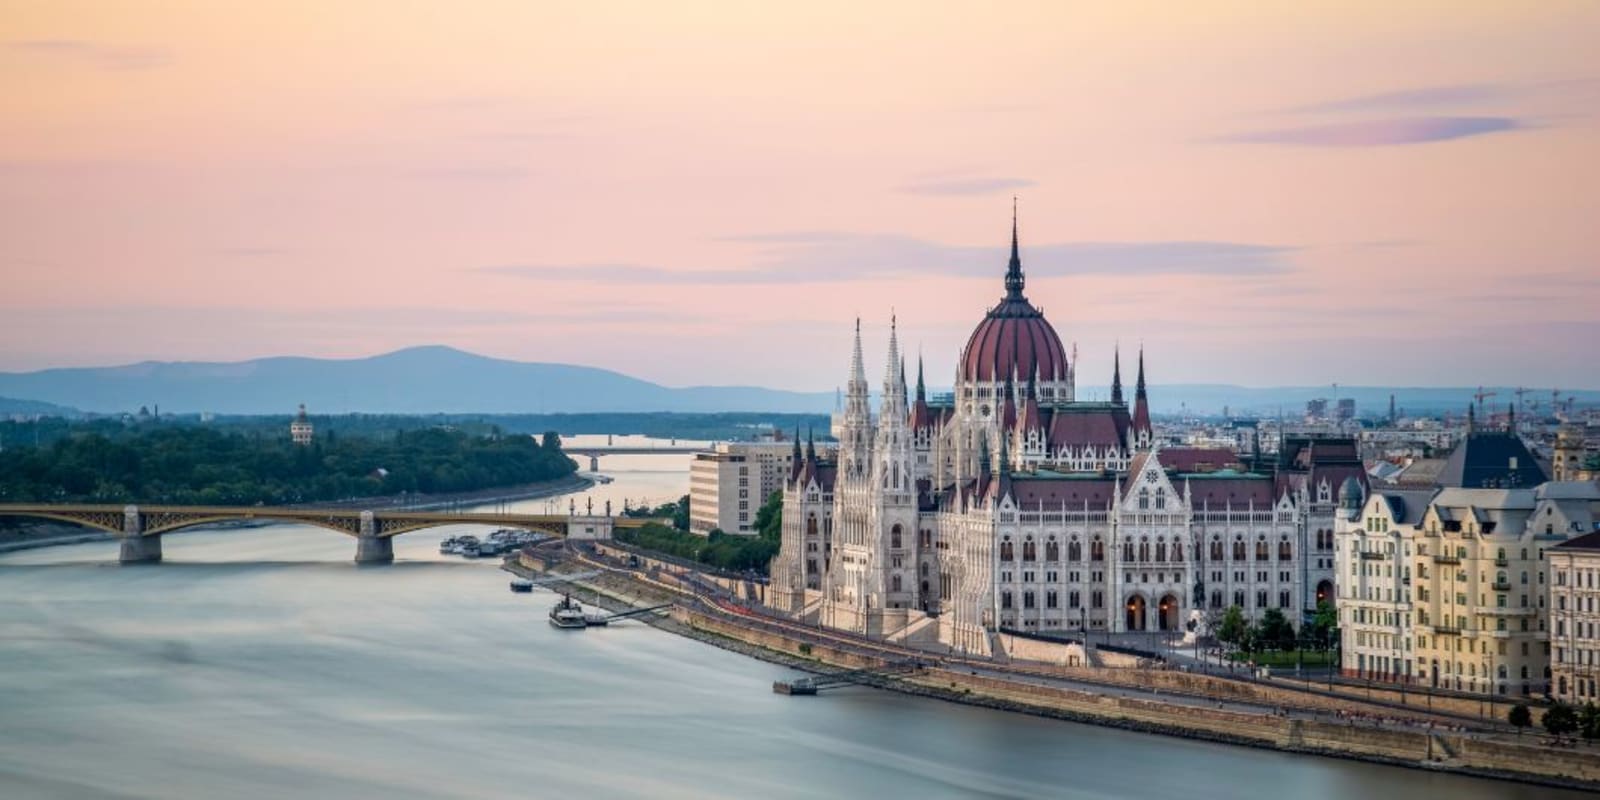 The Hungarian Parliament Building on the Banks of the Danube at dawn